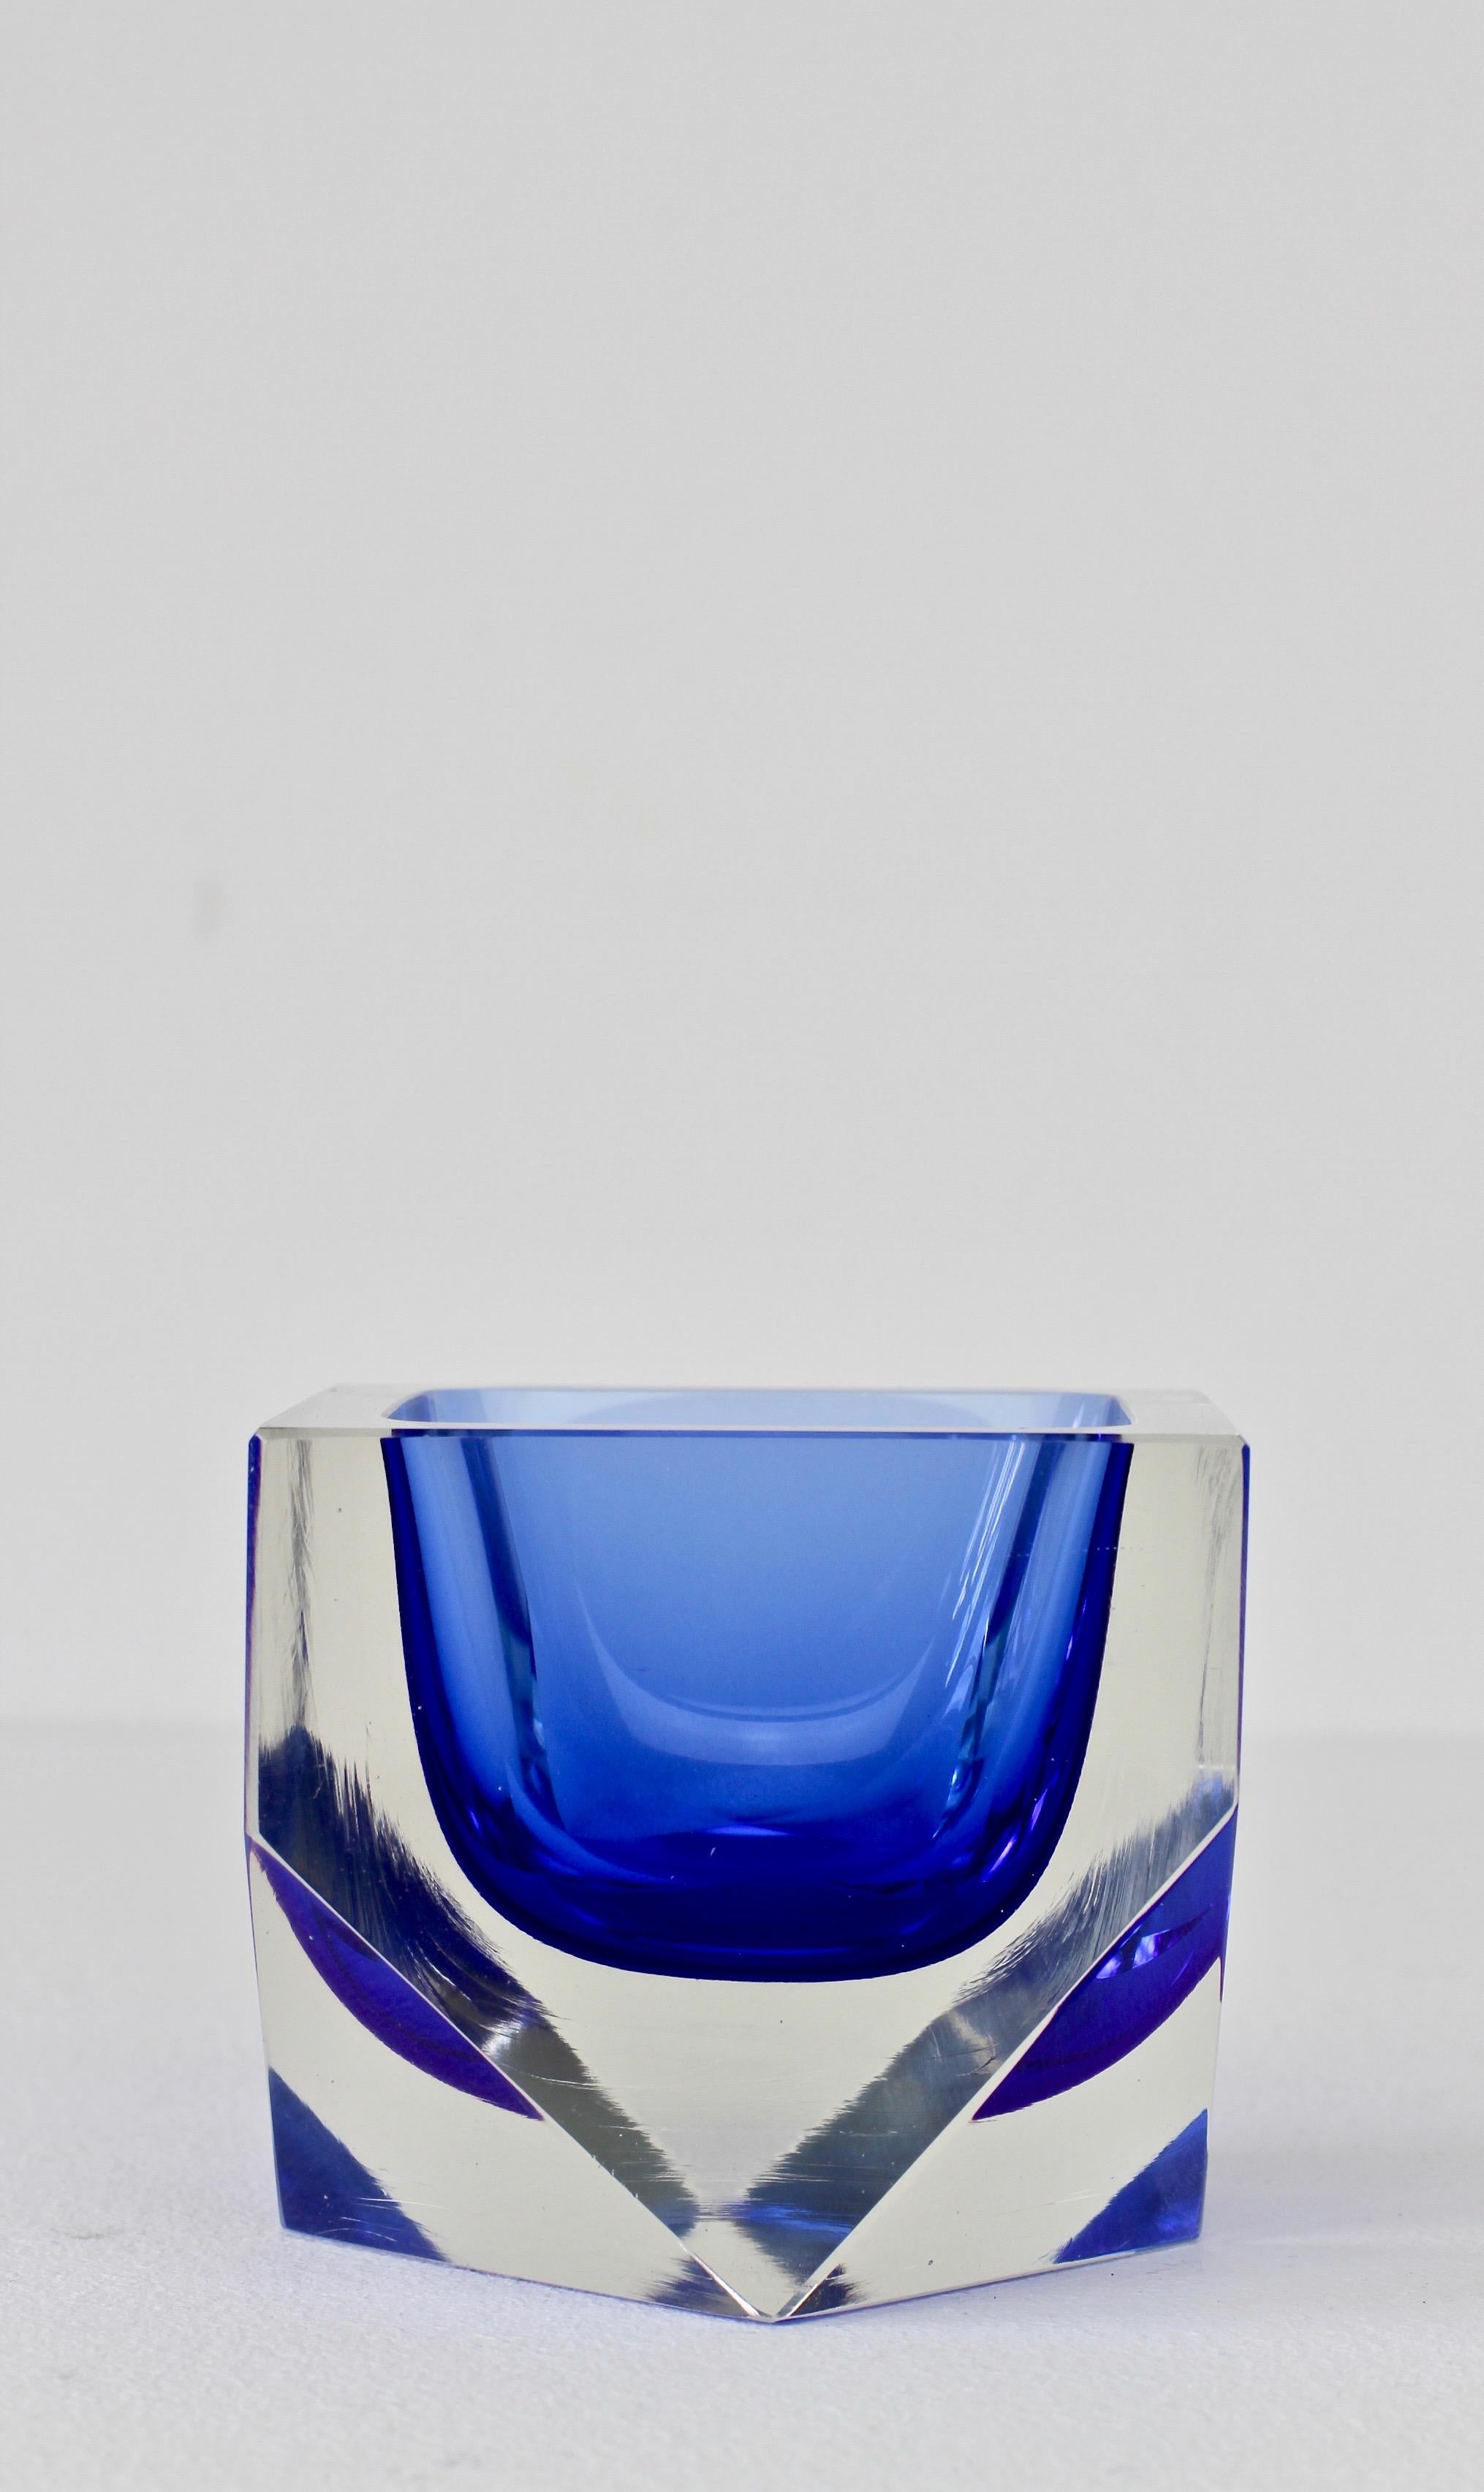 A beautiful vintage midcentury Murano faceted art glass bowl or ashtray attributed to Mandruzzato, circa 1975. The combination of clear and cobalt or sapphire blue 'Sommerso' cut-glass looks stunning.

The early work of Mandruzzato is quite hard